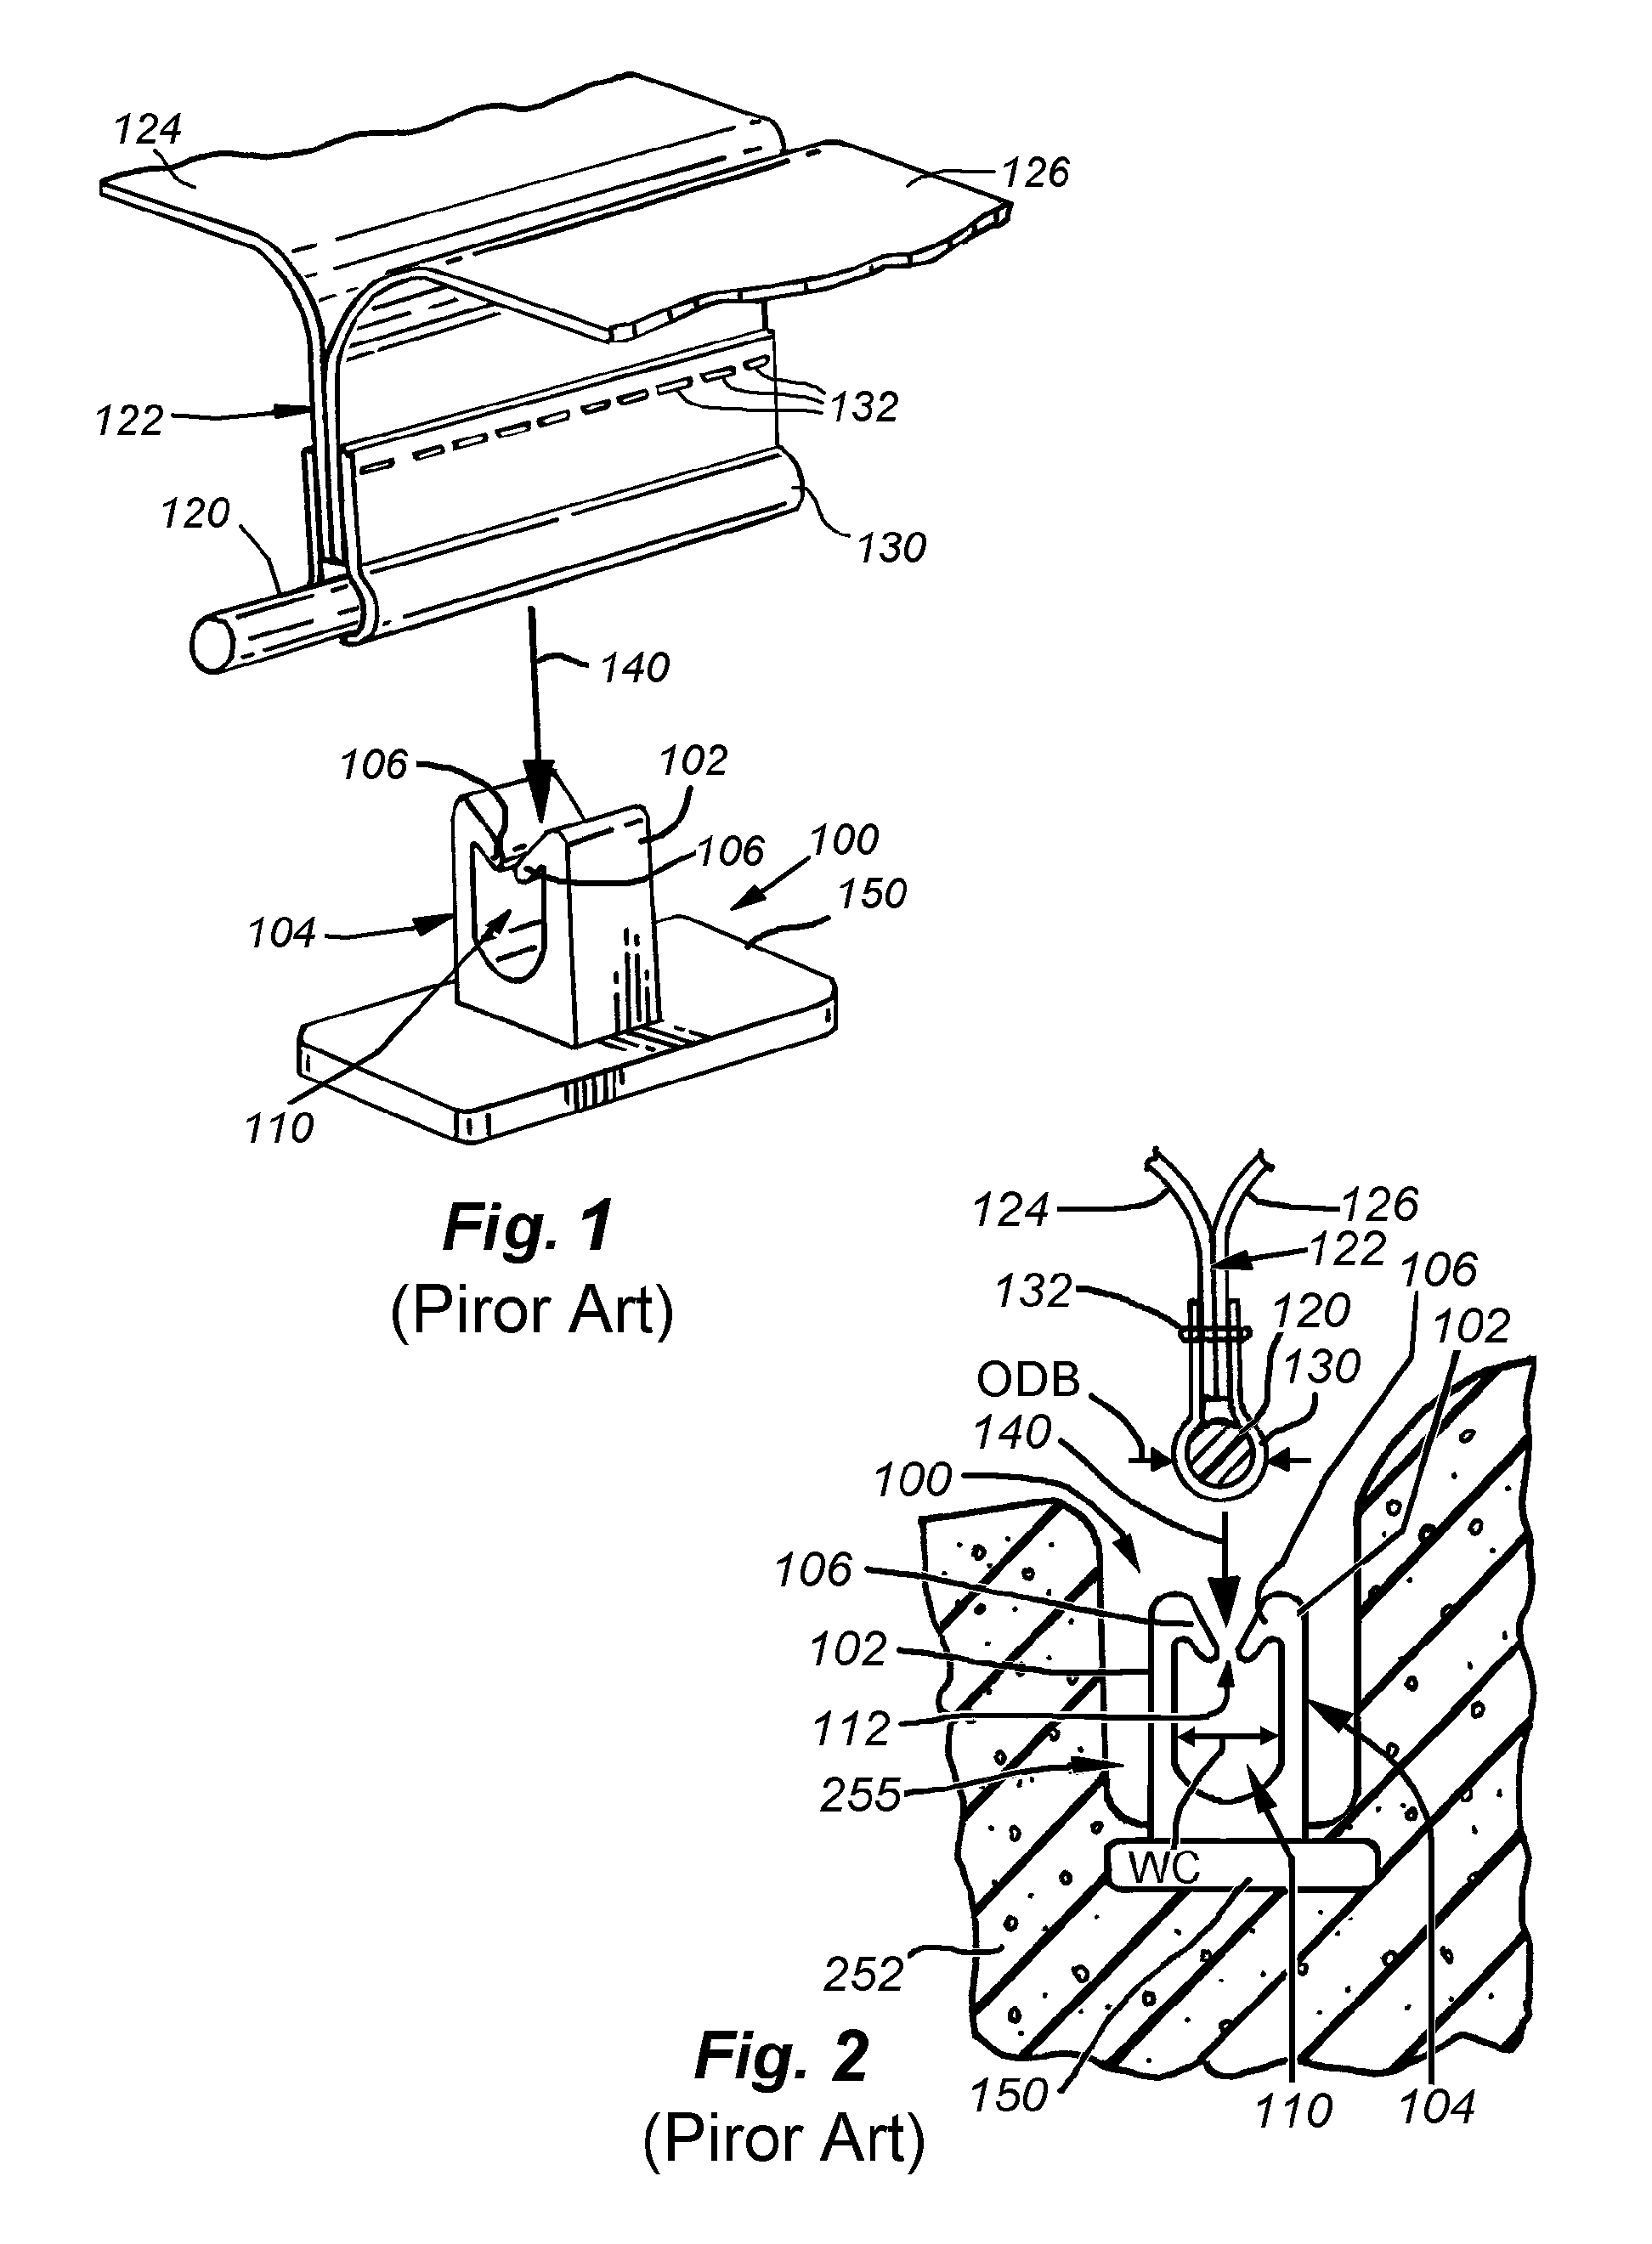 Festooned trim clip system and method for attaching festooned clips to a substrate